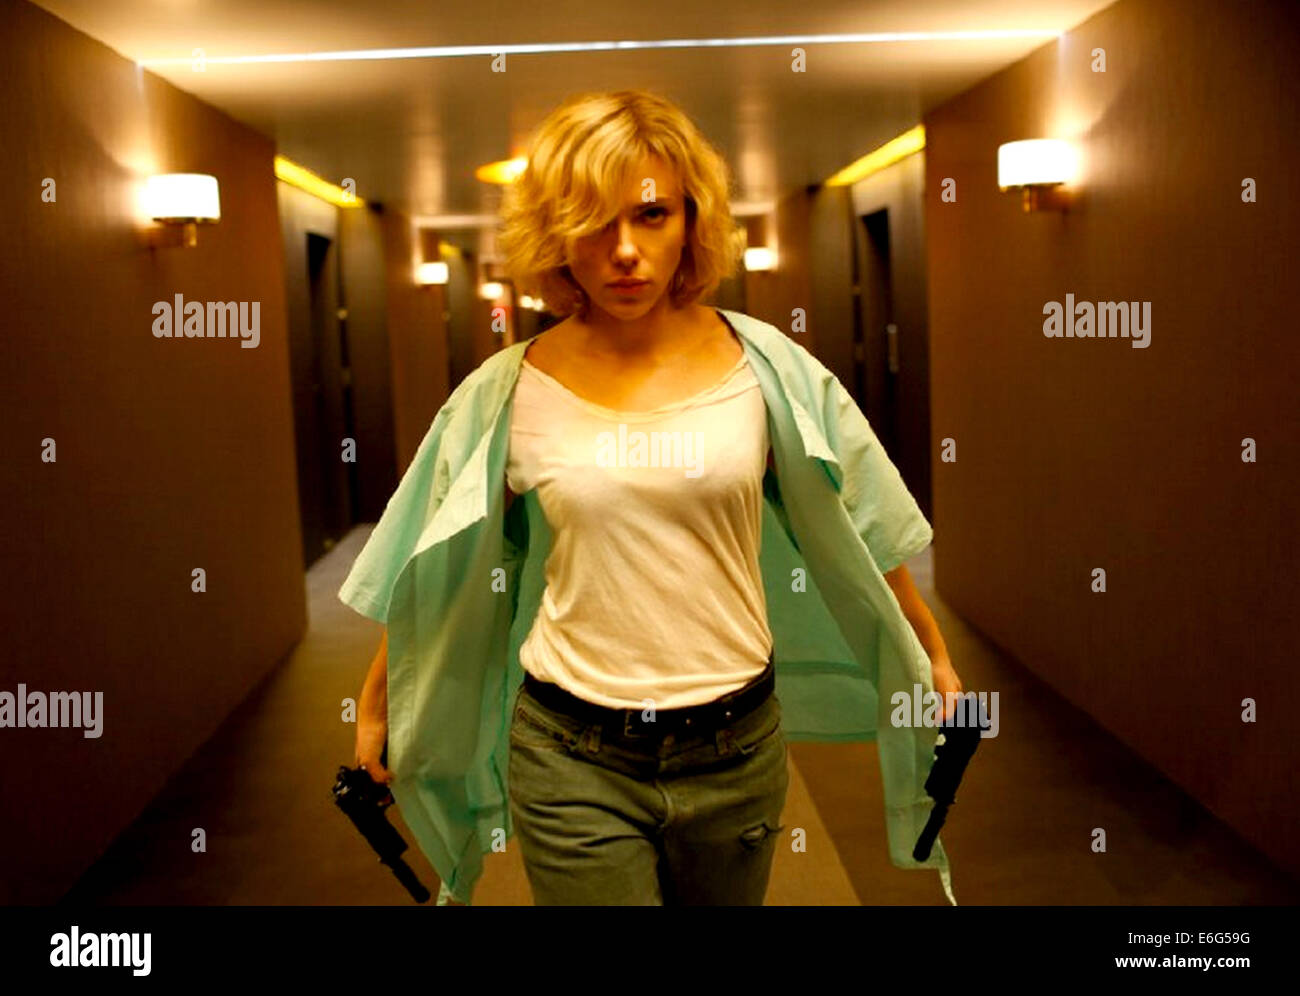 LUCY 2014 Canal+ film with Scarlett Johansson Stock Photo